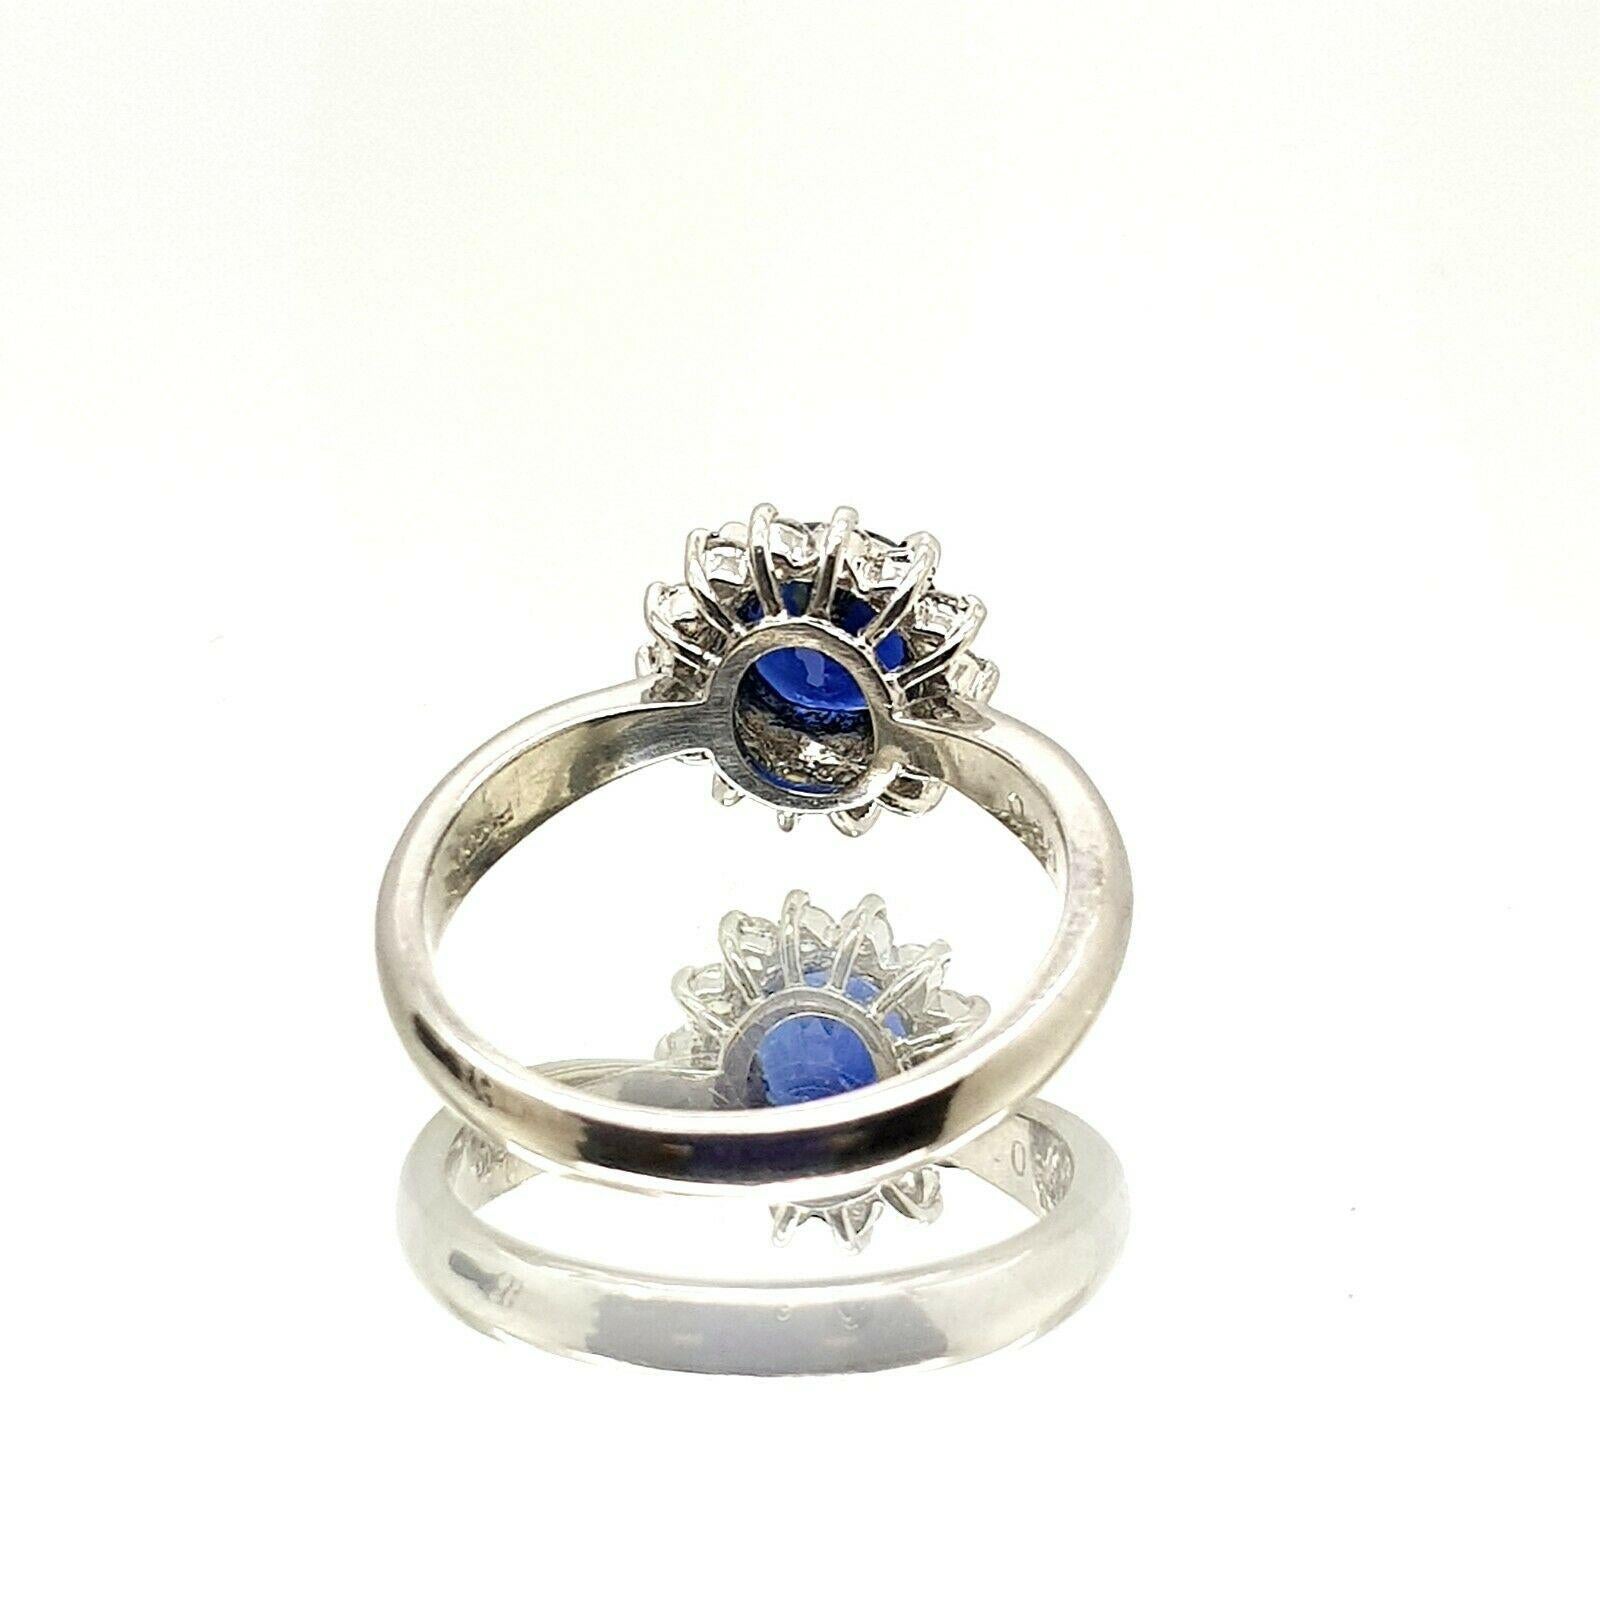  This is beautiful platinum ring with nice intense blue sapphire and diamonds. Looks very elegant on the hand. The current ring size is 5US, but it can be resized. 
Specifications:
    main stone: BLUE SAPPHIRE  0.88 ct
    additional: ROUND